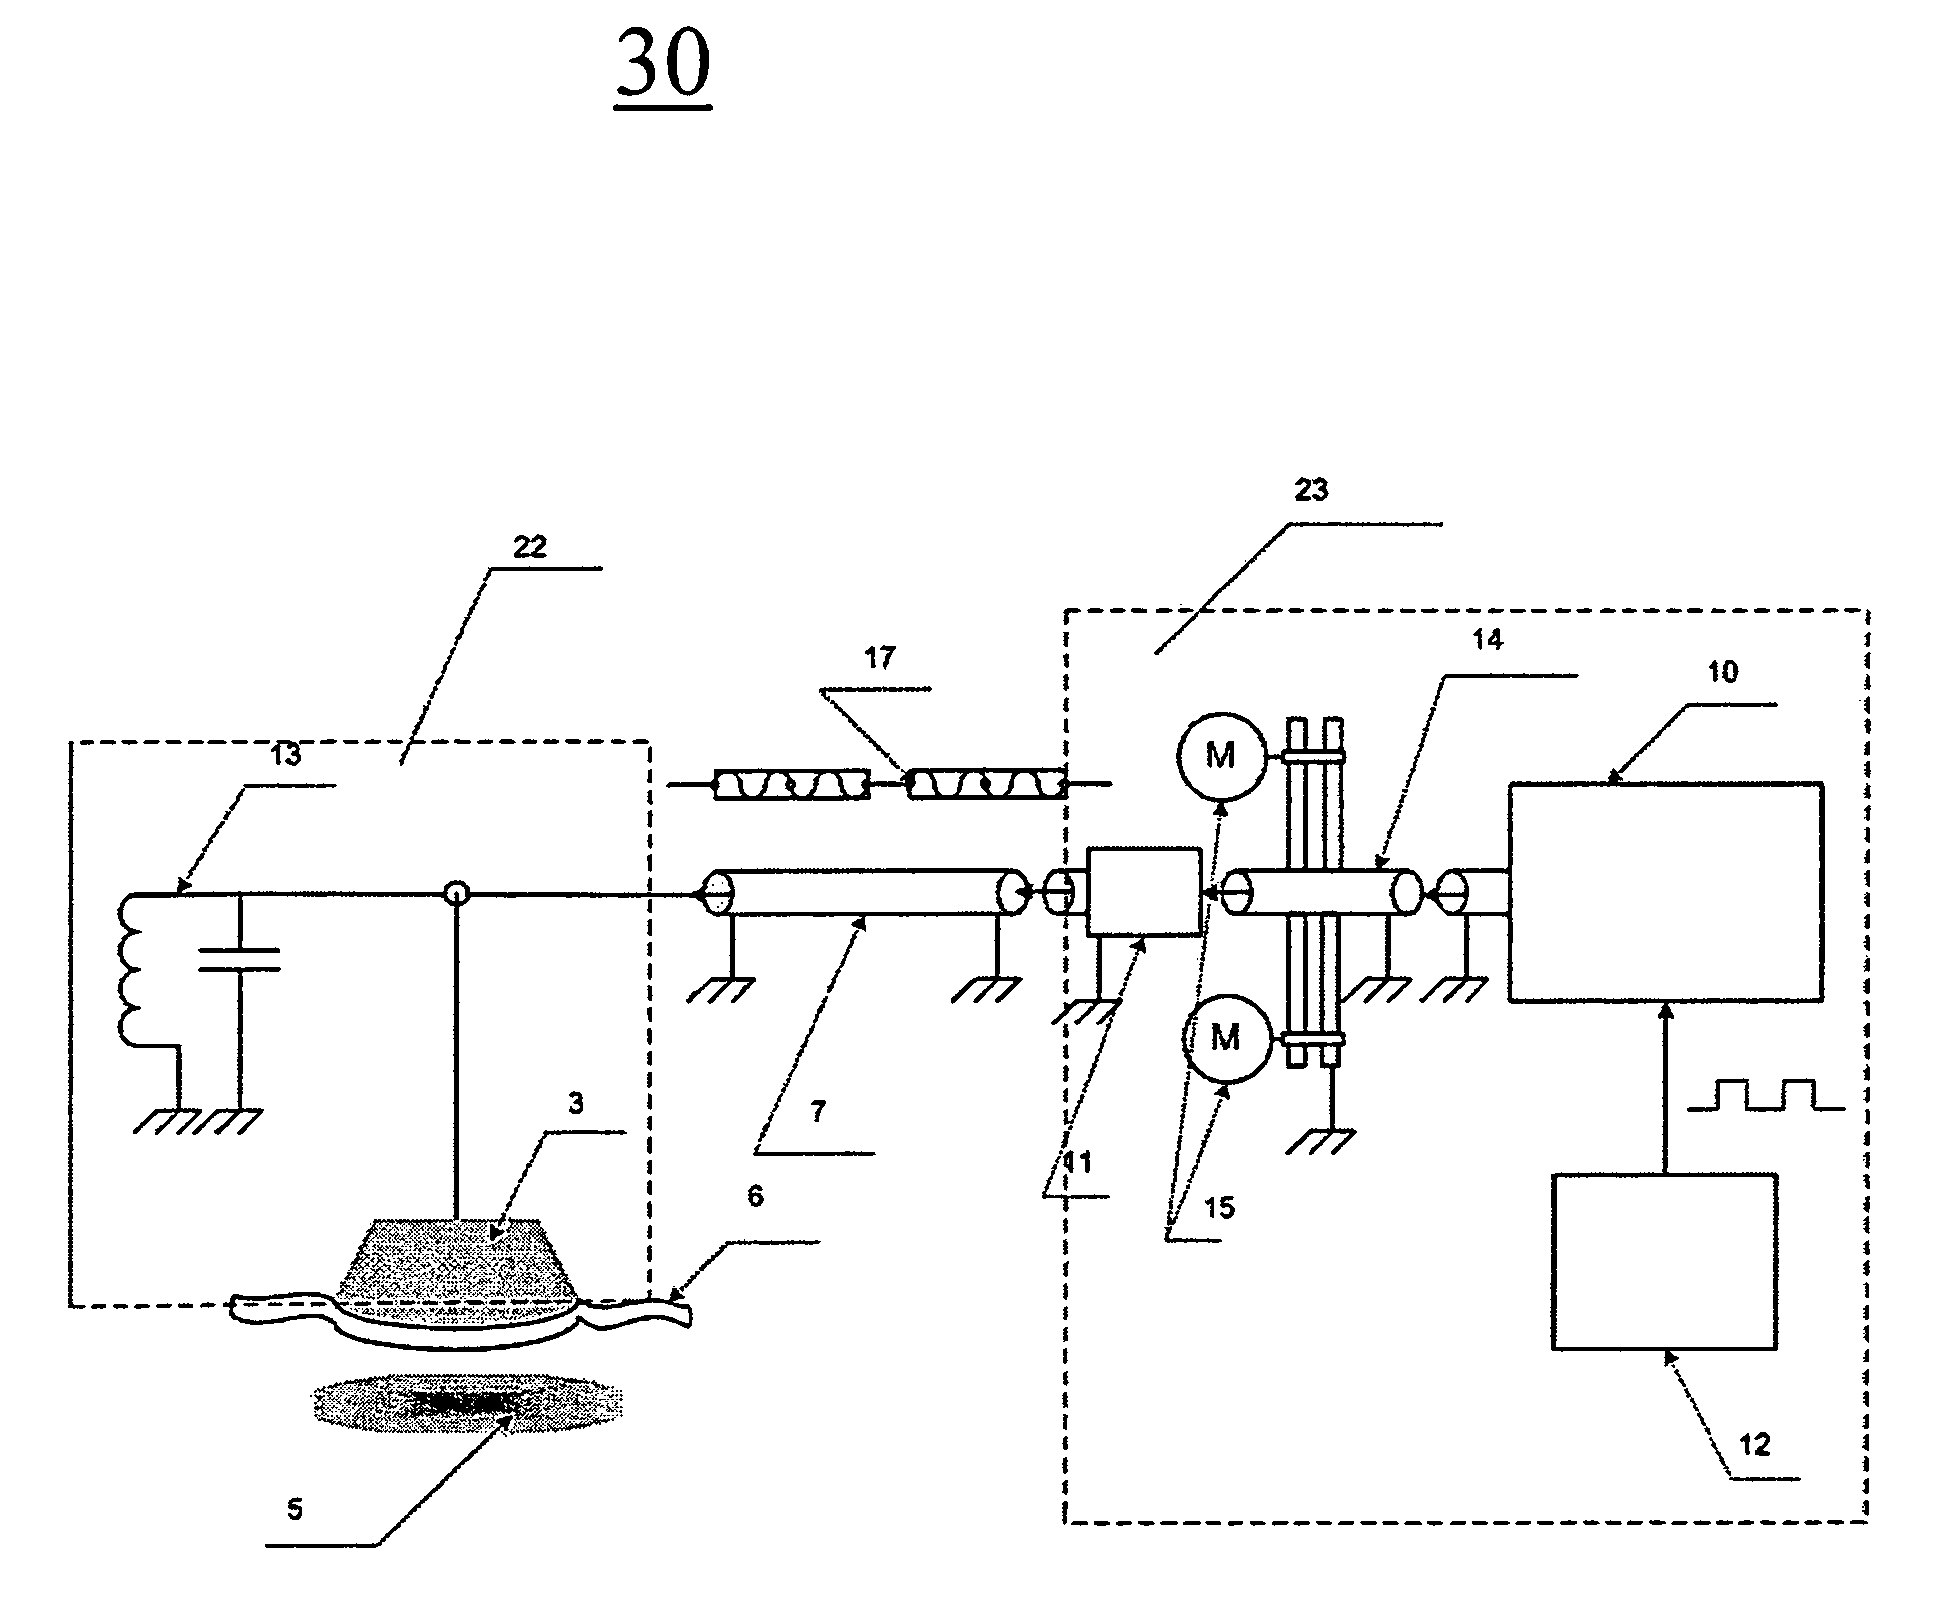 System and method for heating biological tissue via RF energy